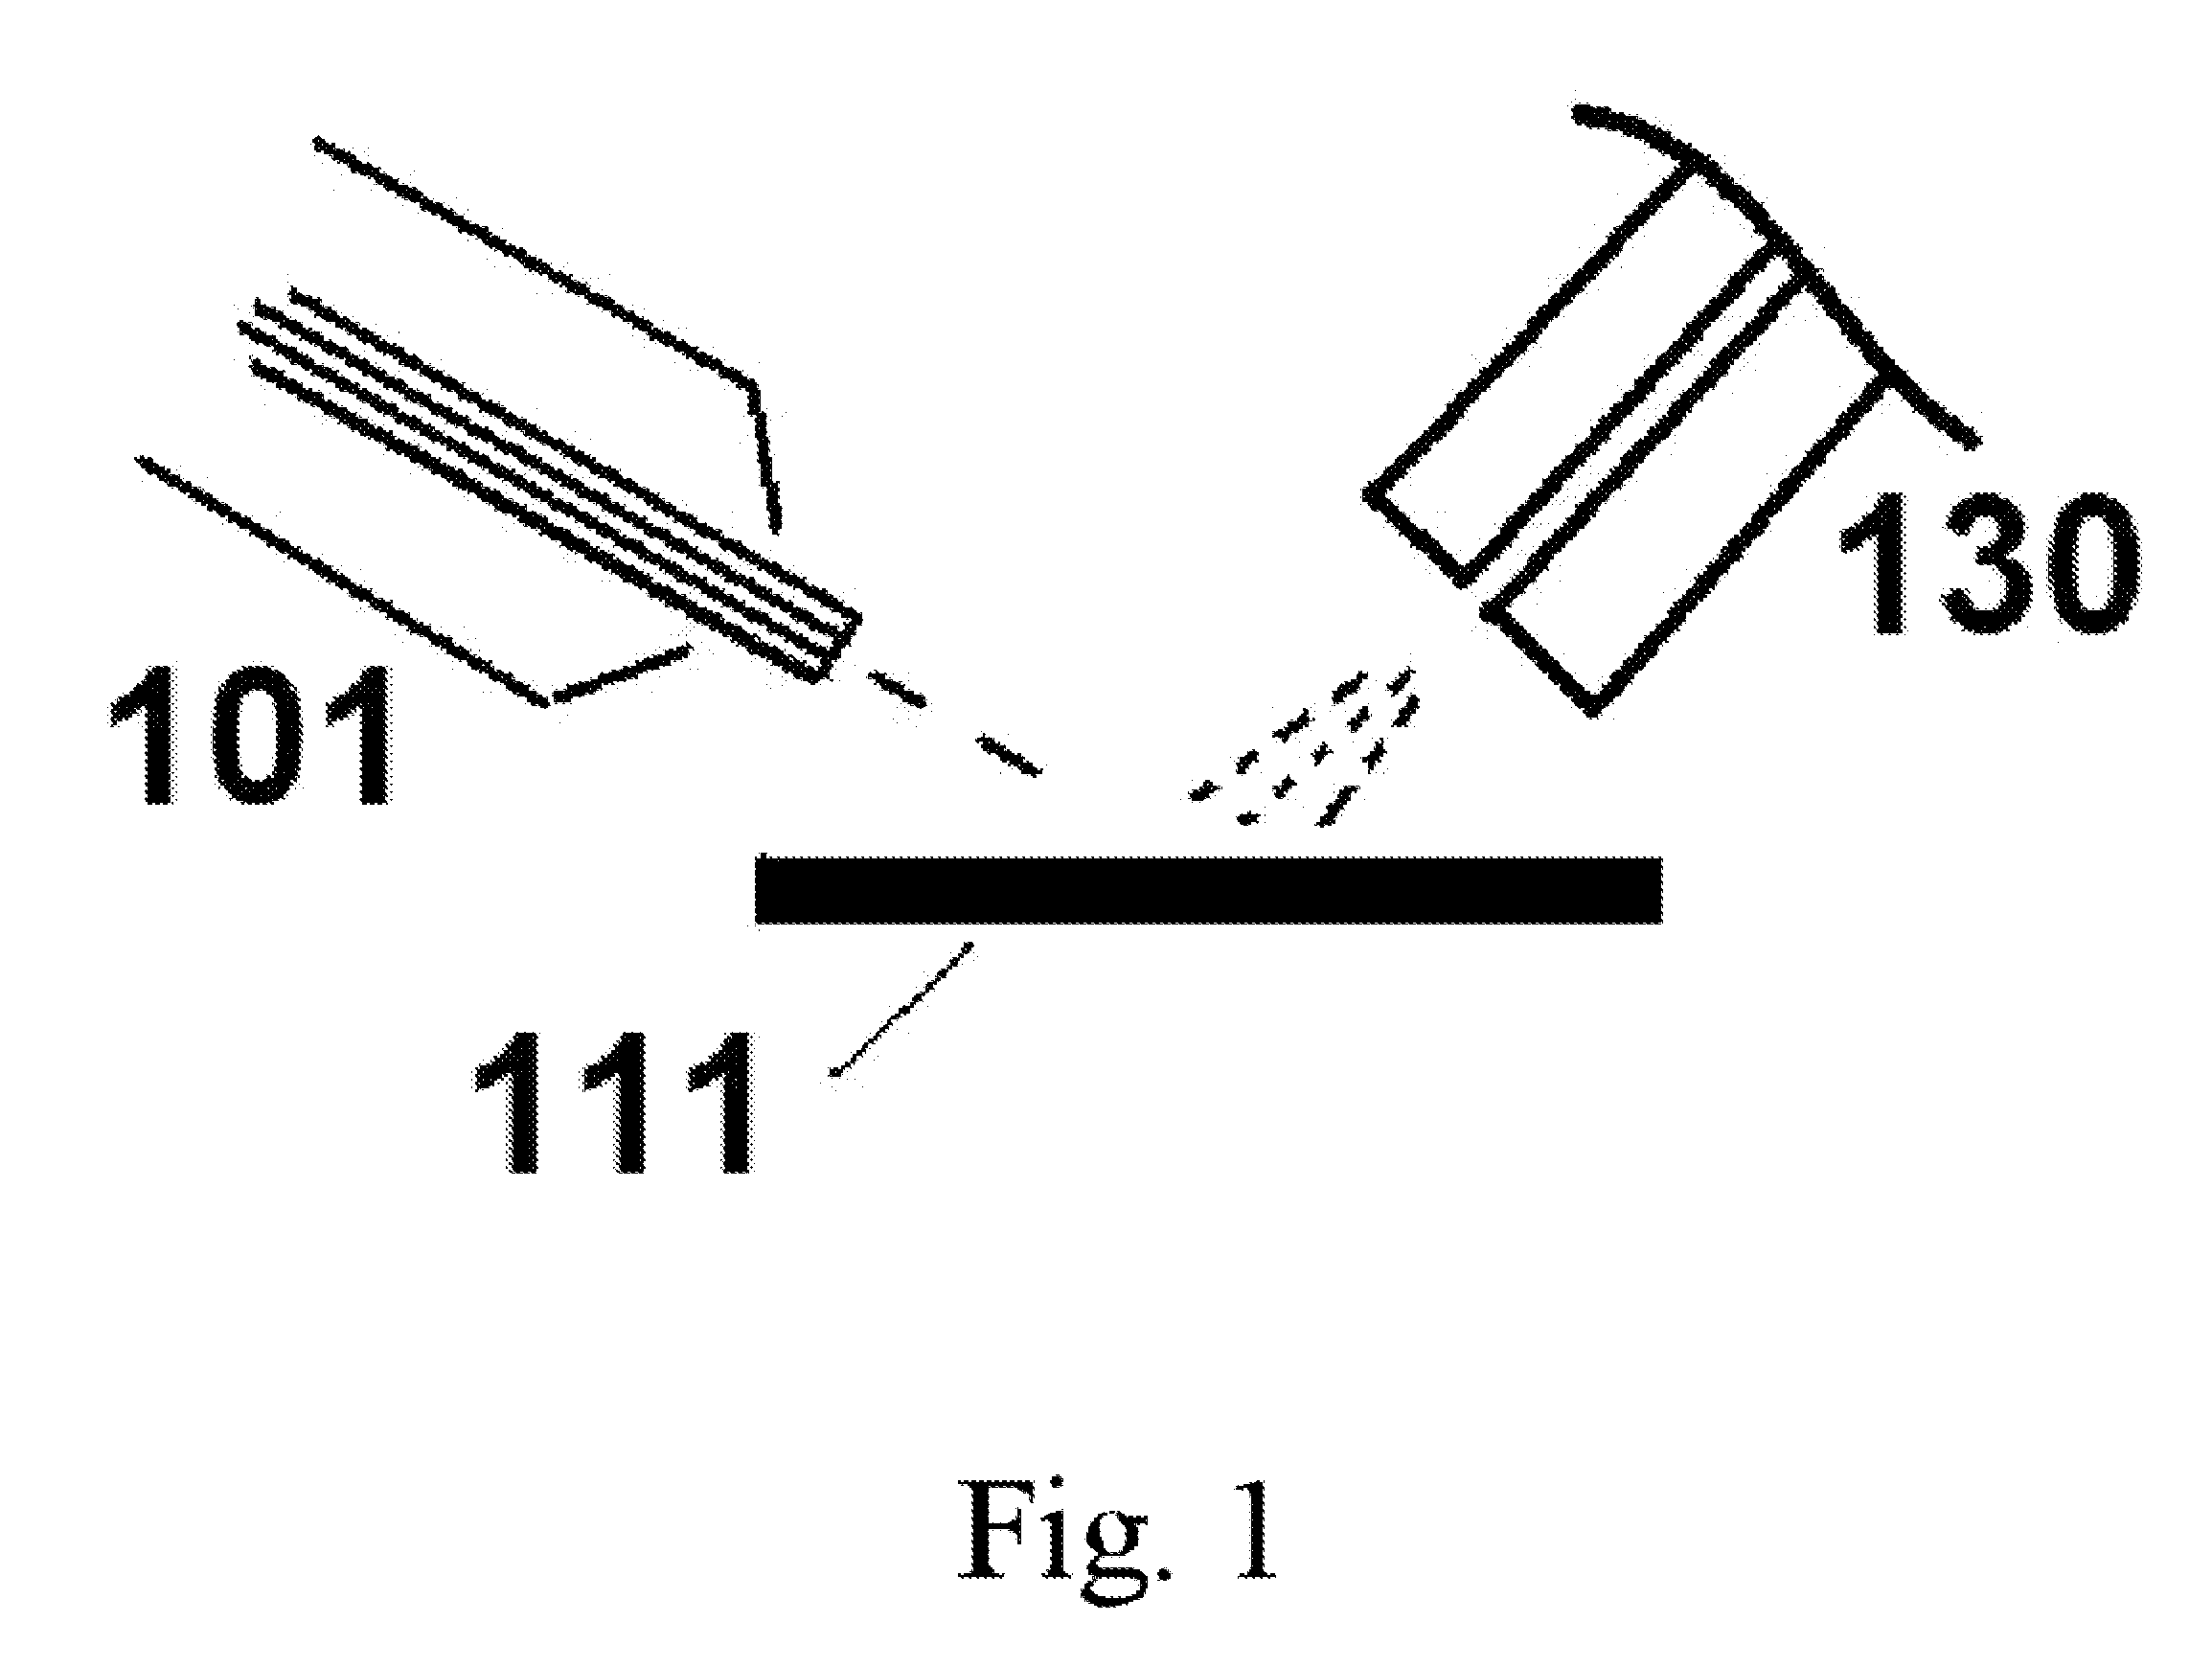 Apparatus for holding solids for use with surface ionization technology